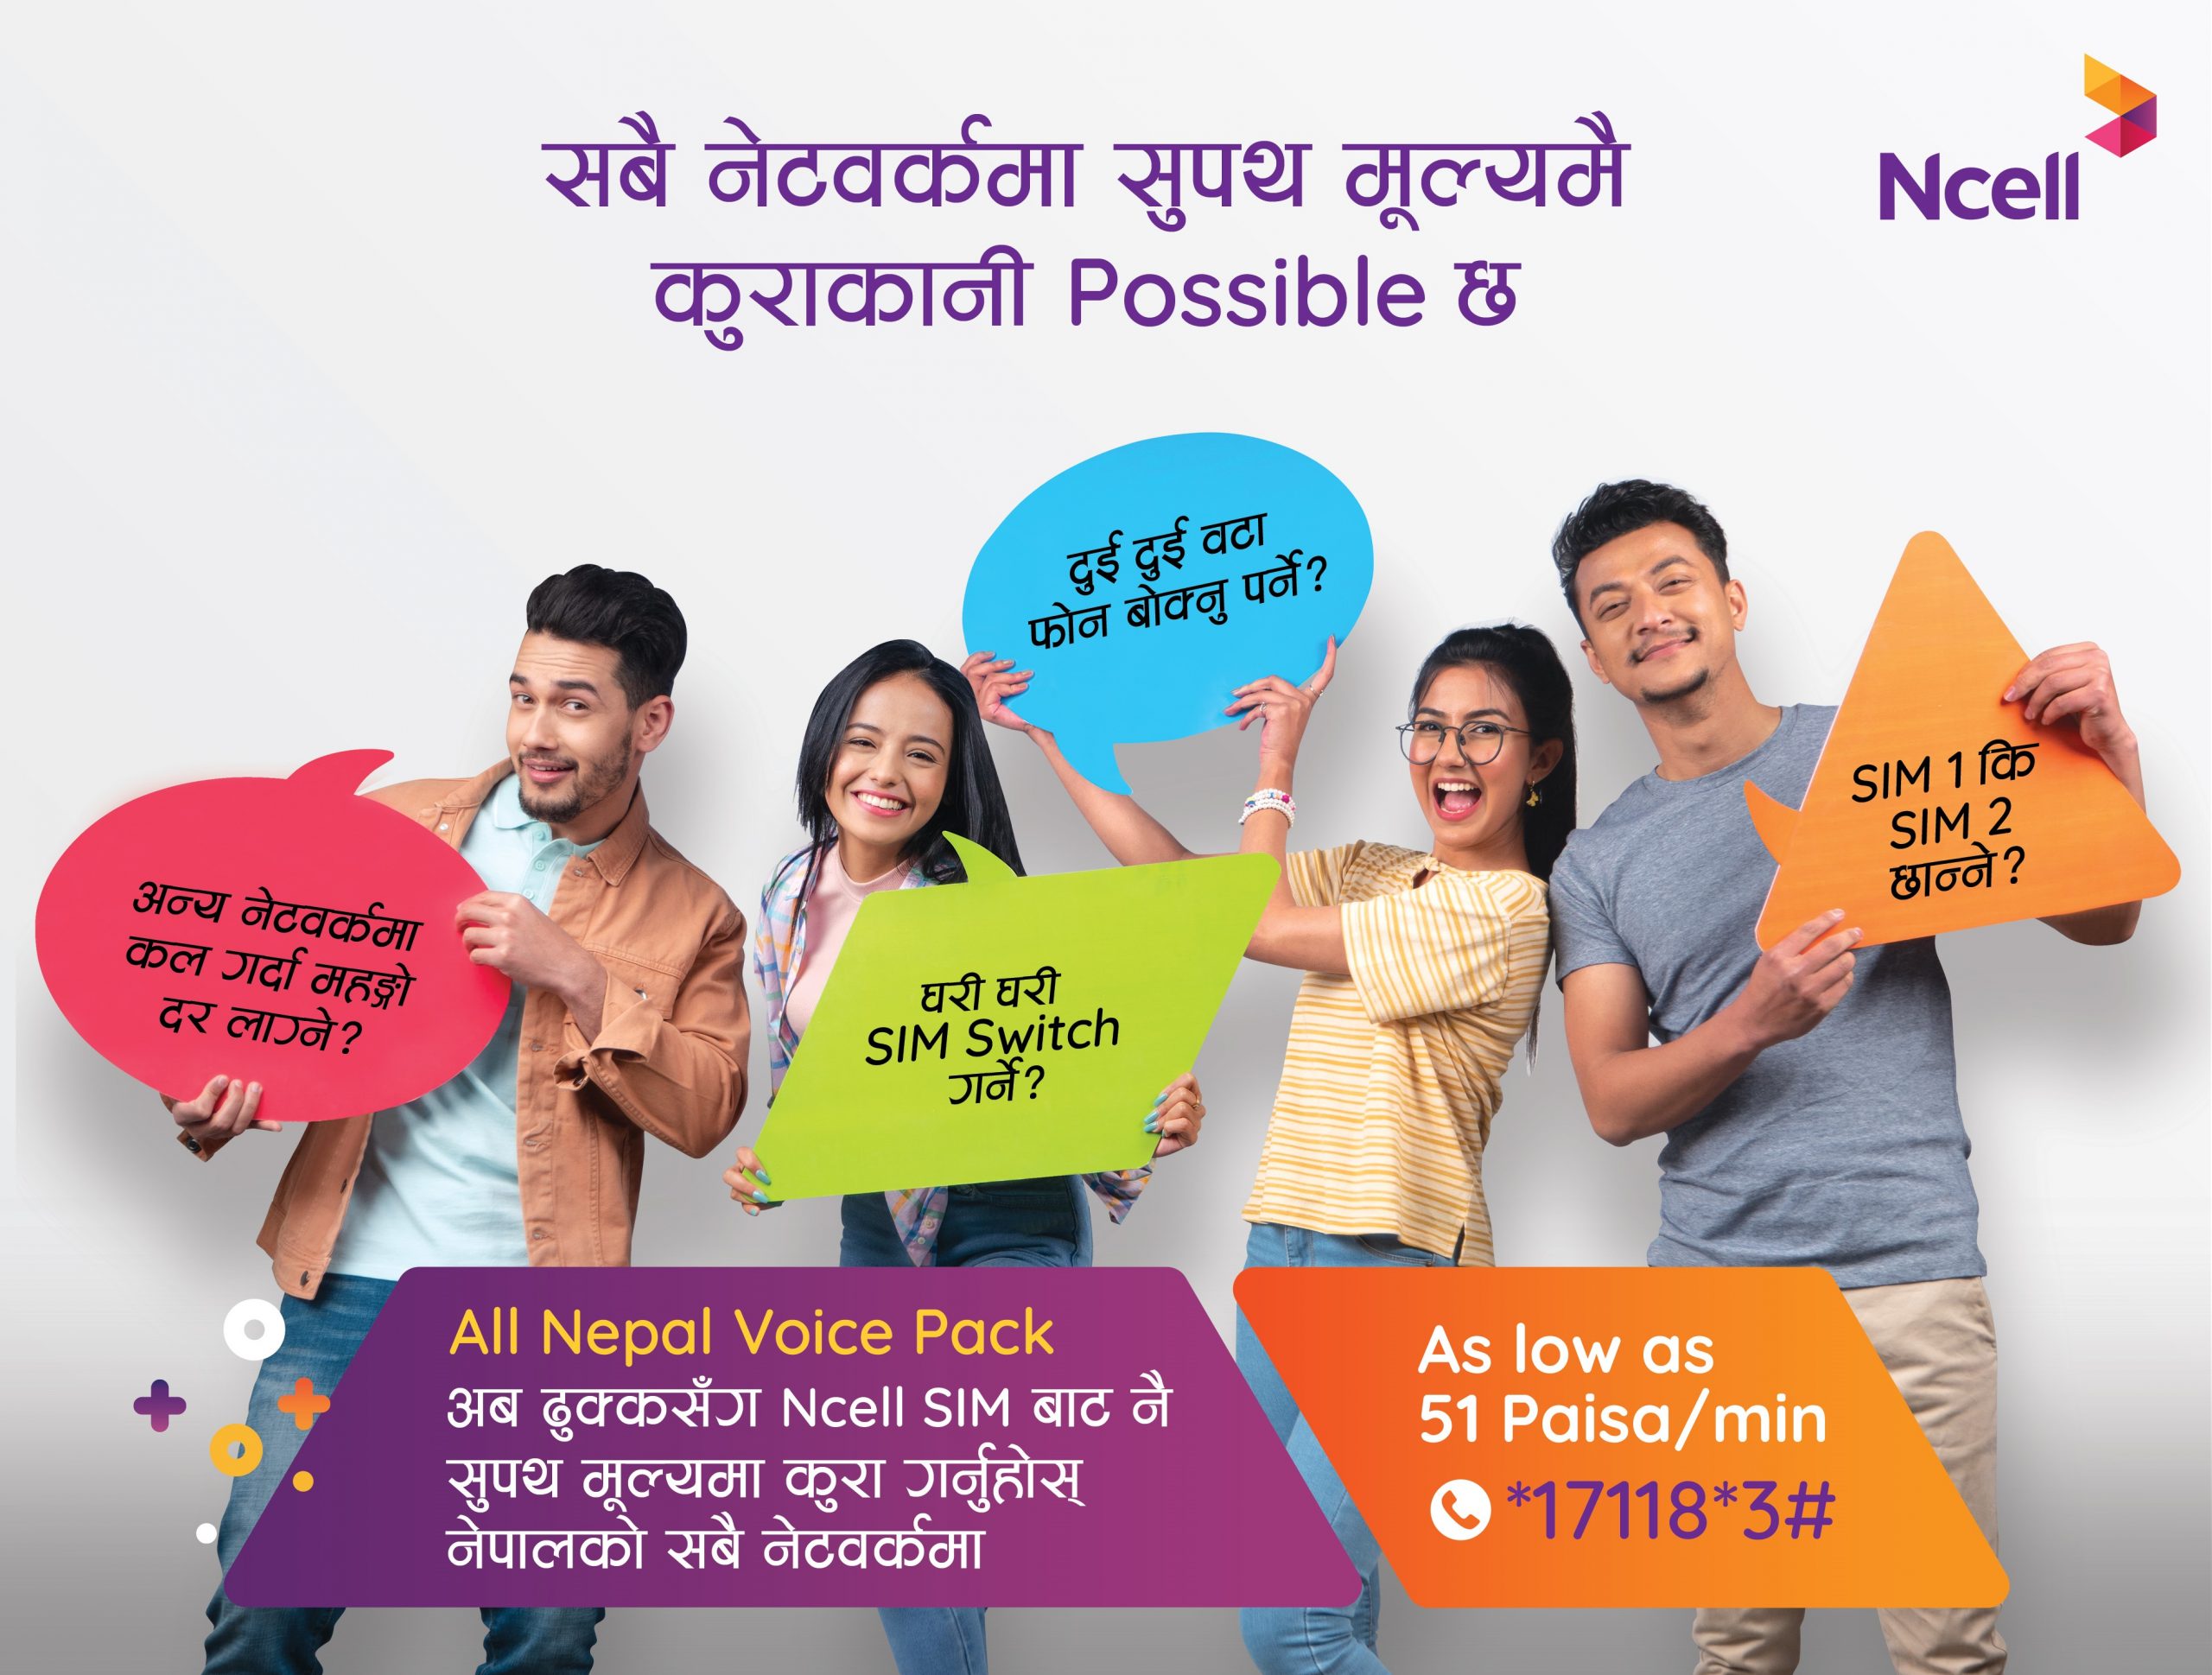 Ncell launches ‘All Nepal Voice Packs’ offer